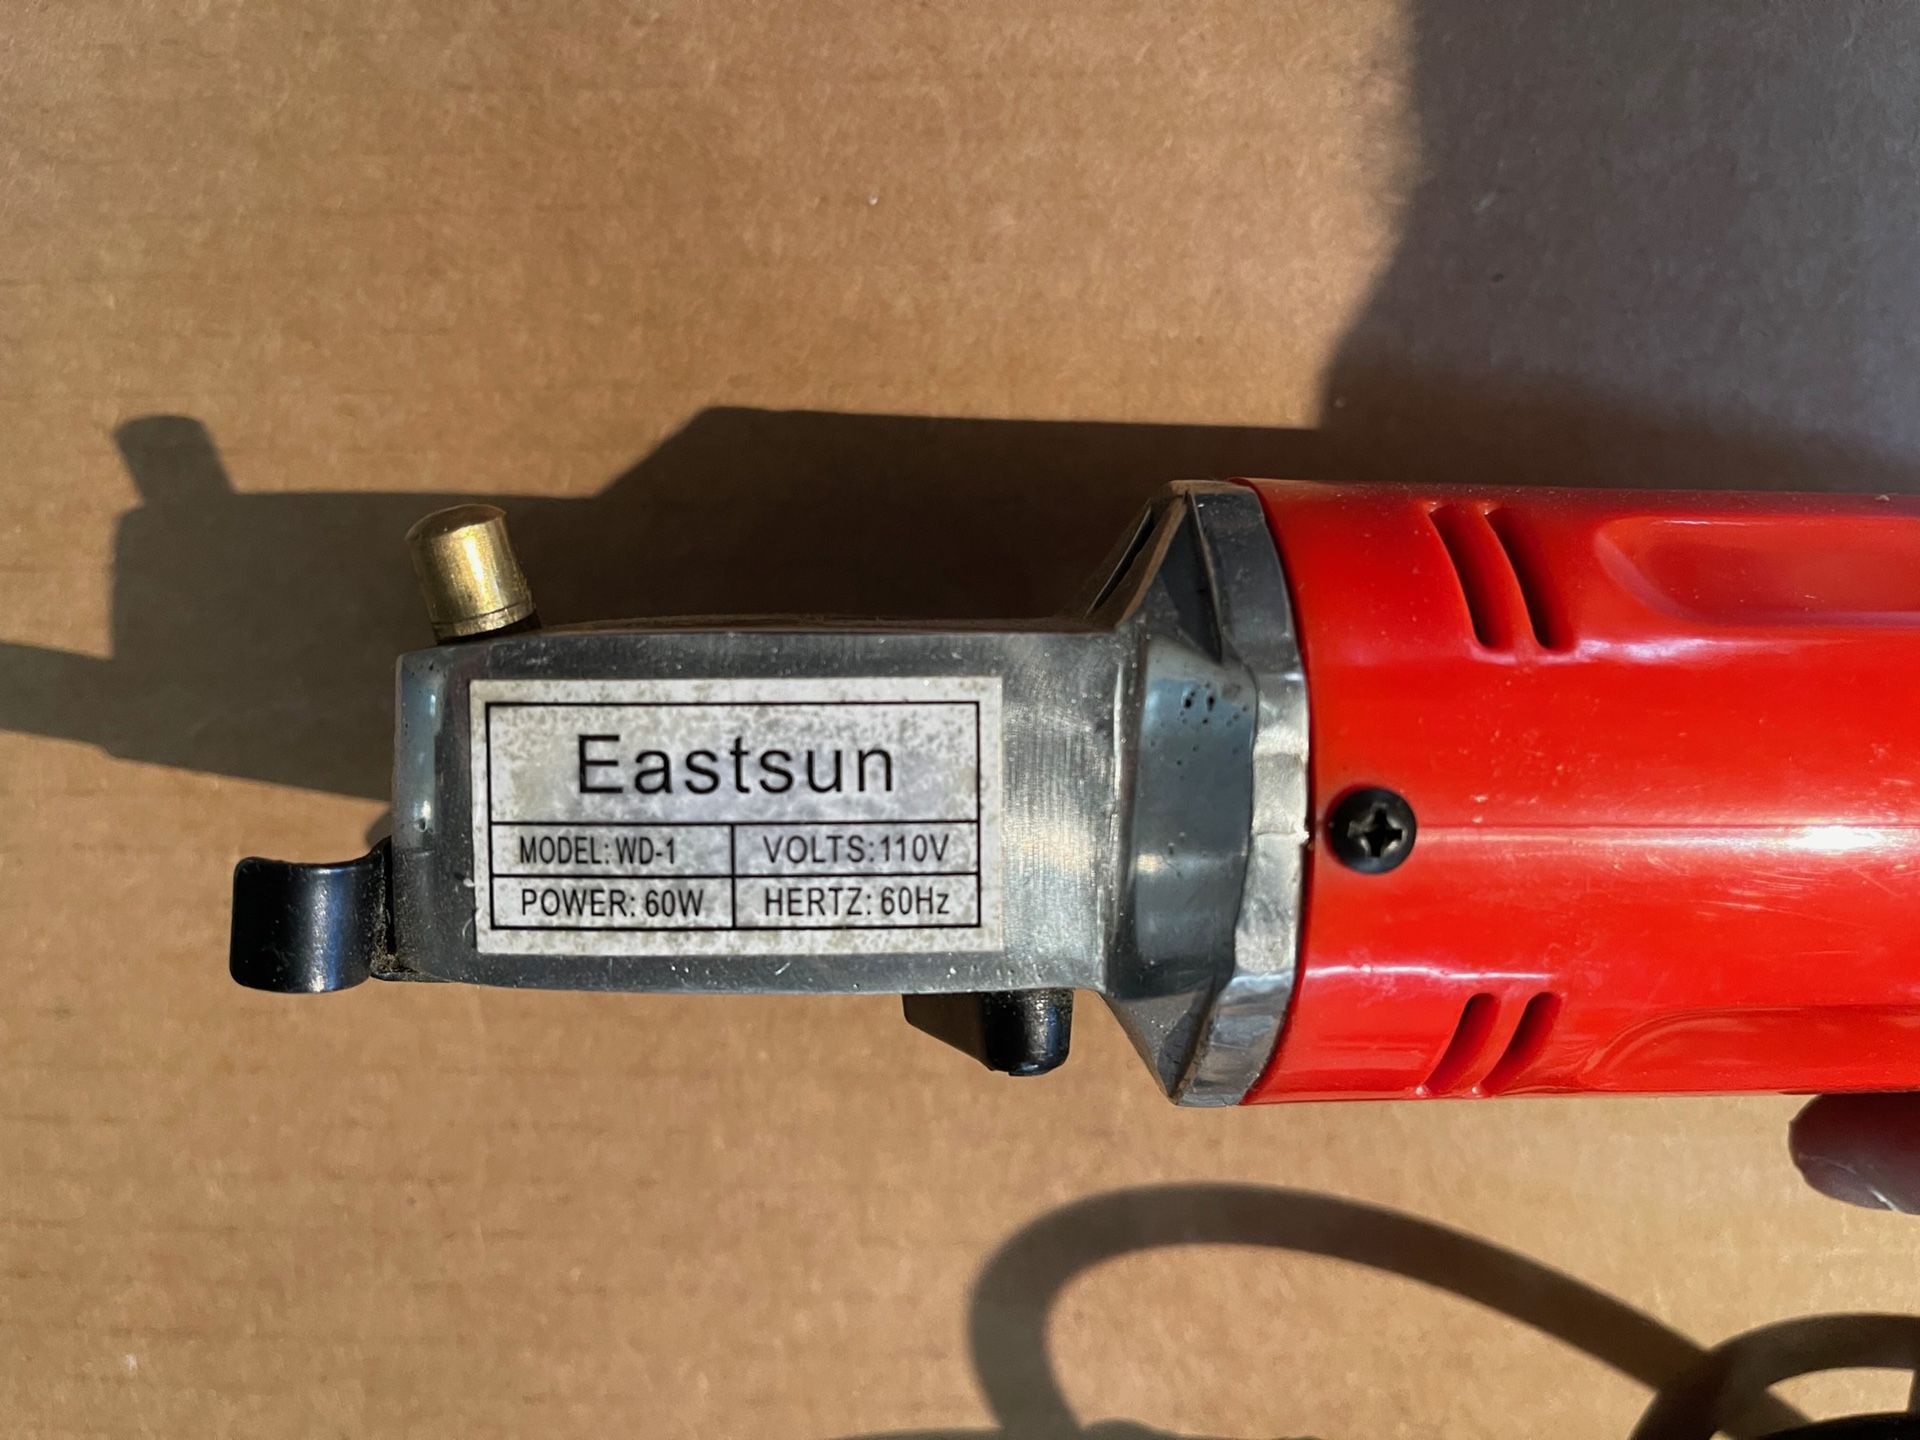 Eastsun Rotary Cutter SUPER PRICE CUT for Sale in Brooklyn, NY - OfferUp